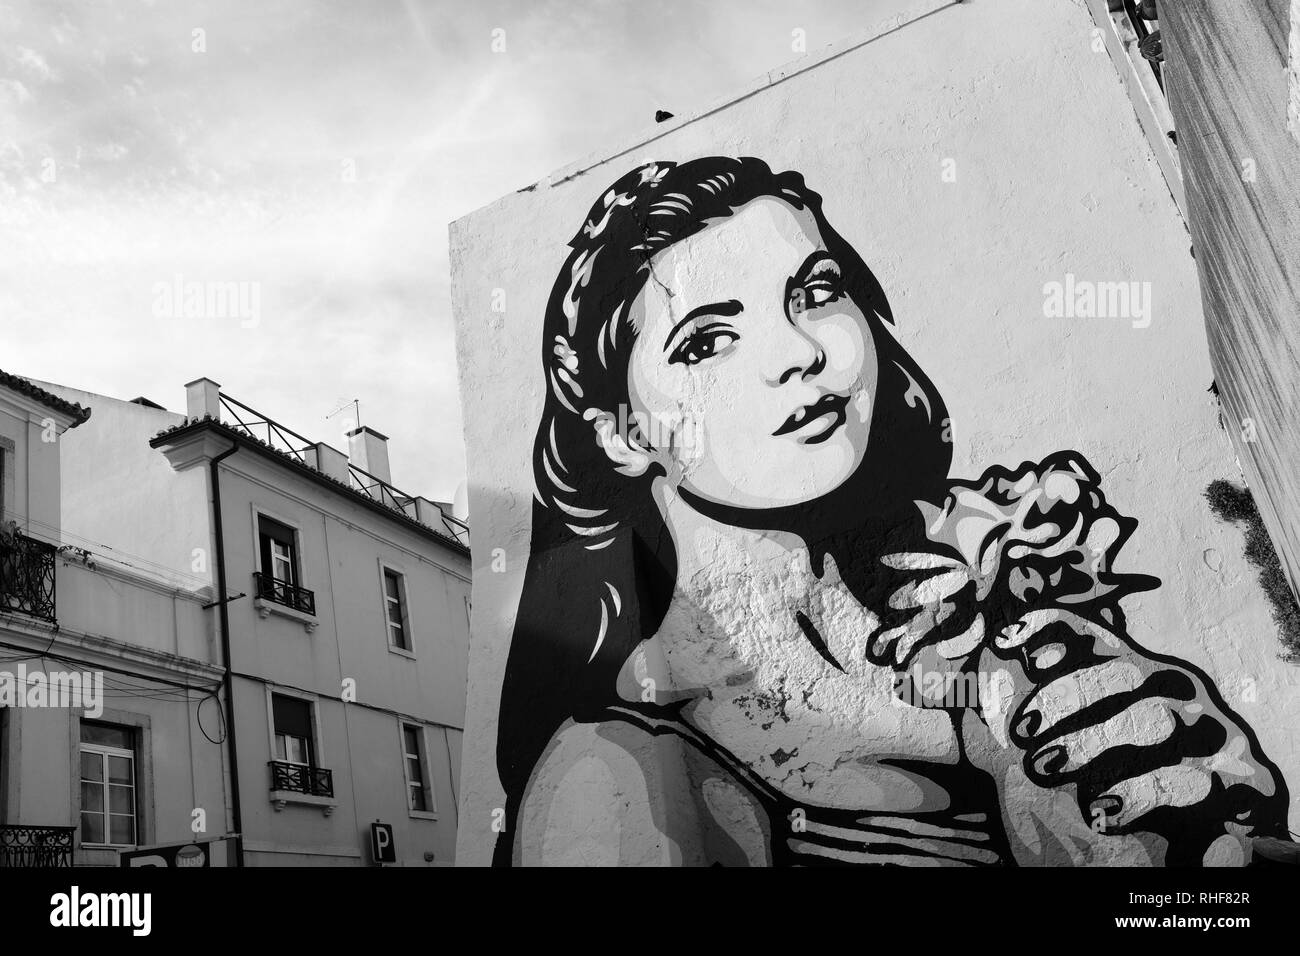 GRAFFITI STREET ART OF YOUNG GIRL HOLDING A BUNCH OF FLOWERS – LISBON PORTUGAL Stock Photo